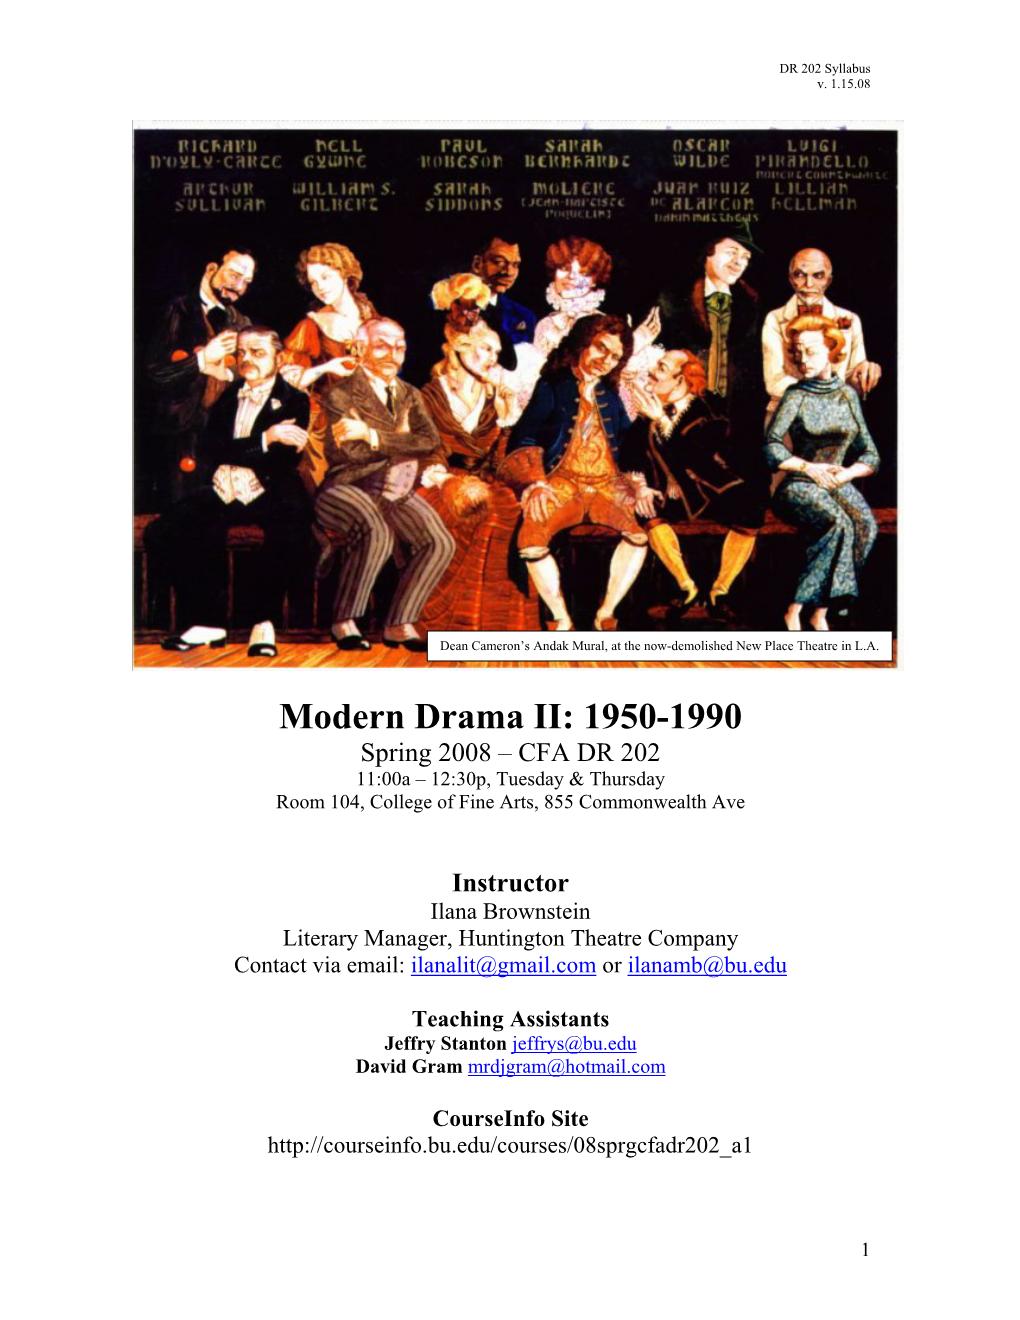 Modern Drama II: 1950-1990 Spring 2008 – CFA DR 202 11:00A – 12:30P, Tuesday & Thursday Room 104, College of Fine Arts, 855 Commonwealth Ave